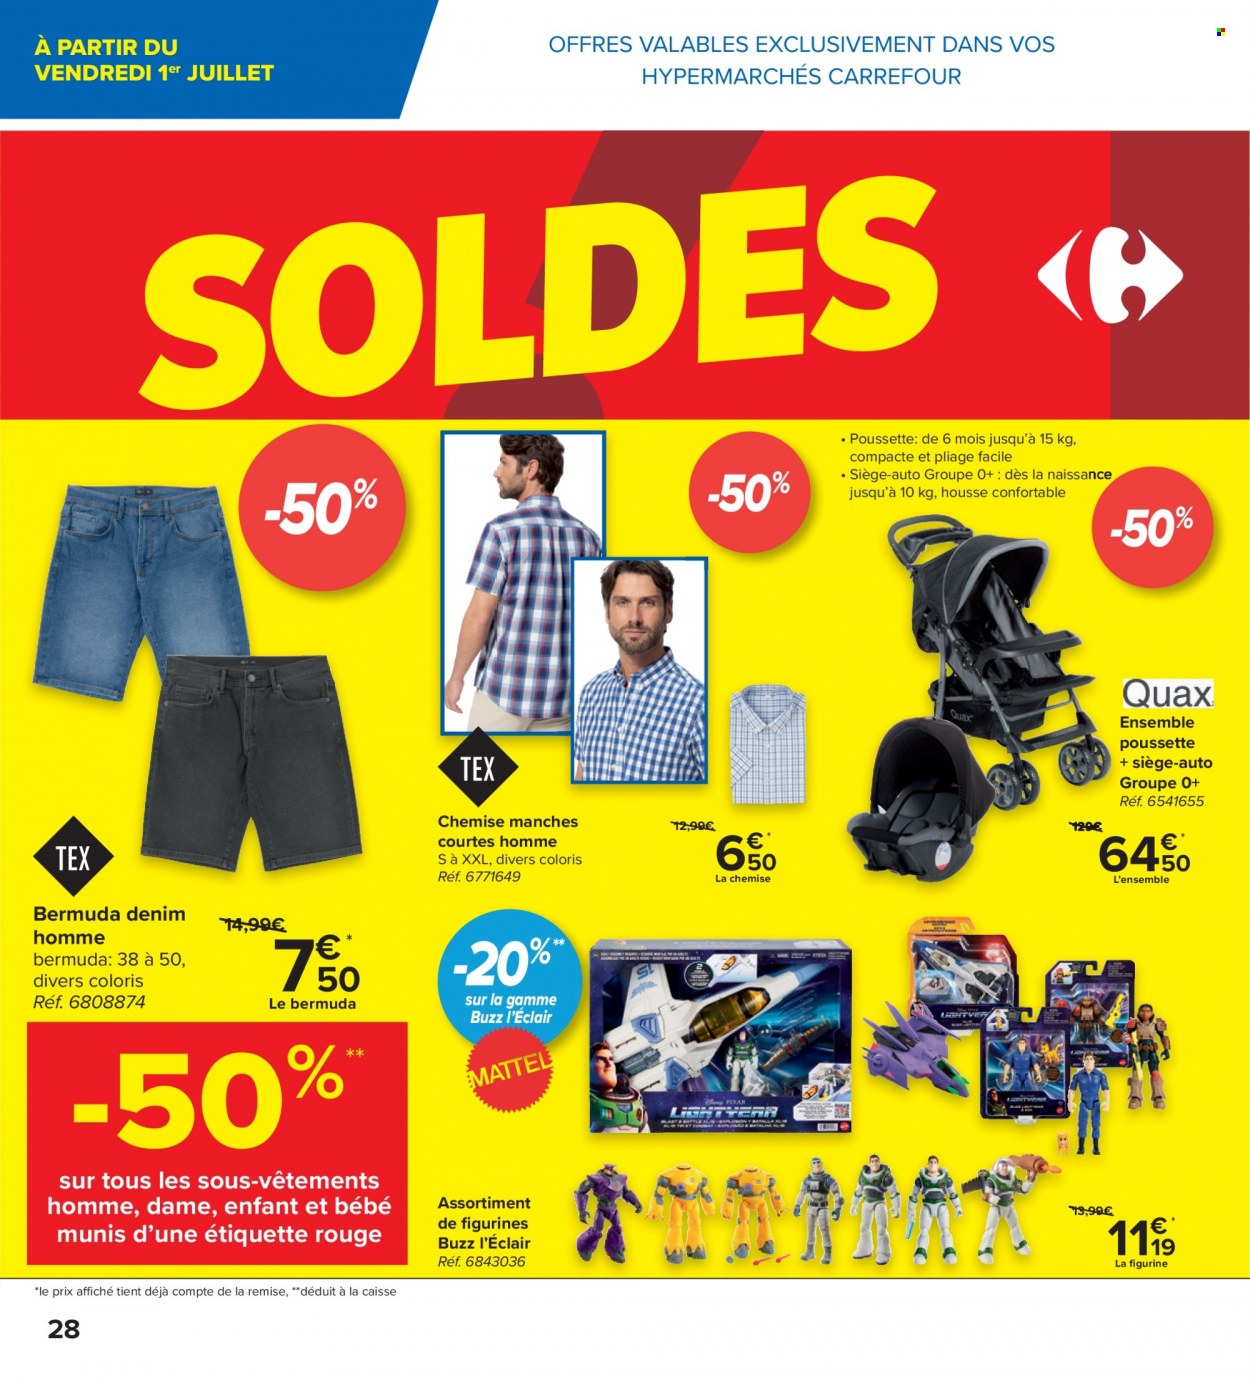 Catalogue Carrefour hypermarkt - 29.6.2022 - 11.7.2022. Page 8.